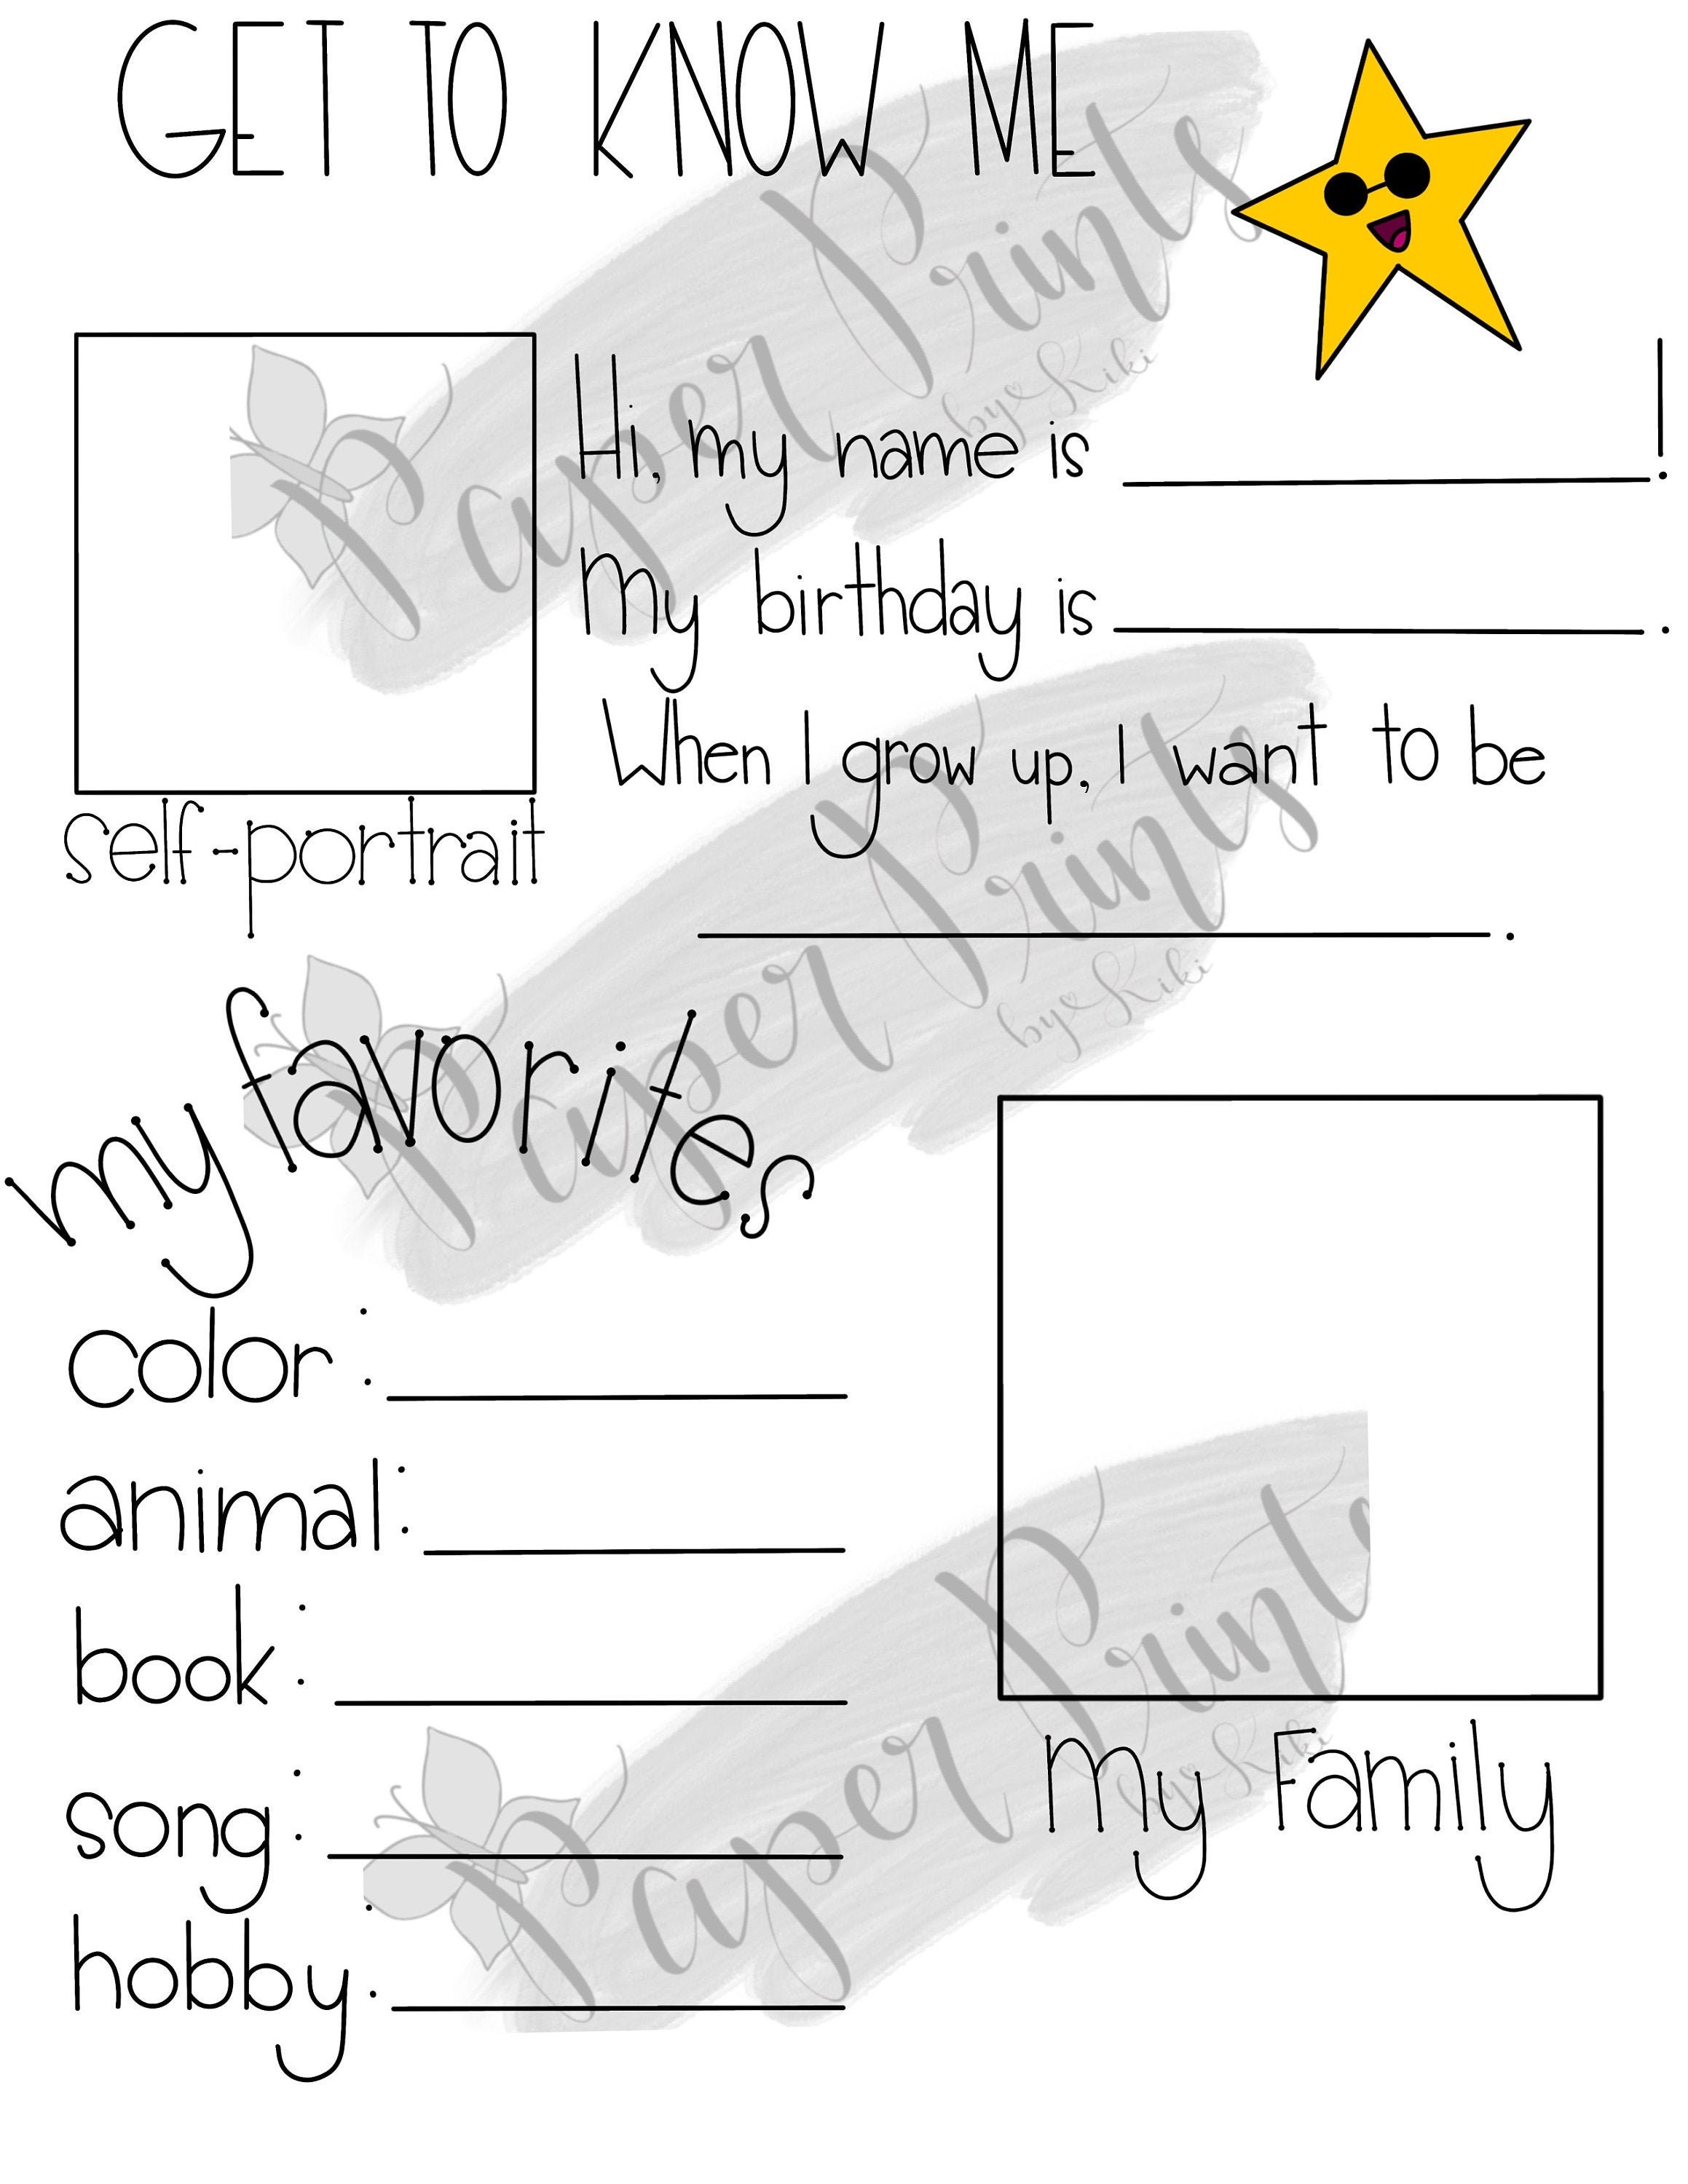 get-to-know-me-student-information-worksheet-download-now-etsy